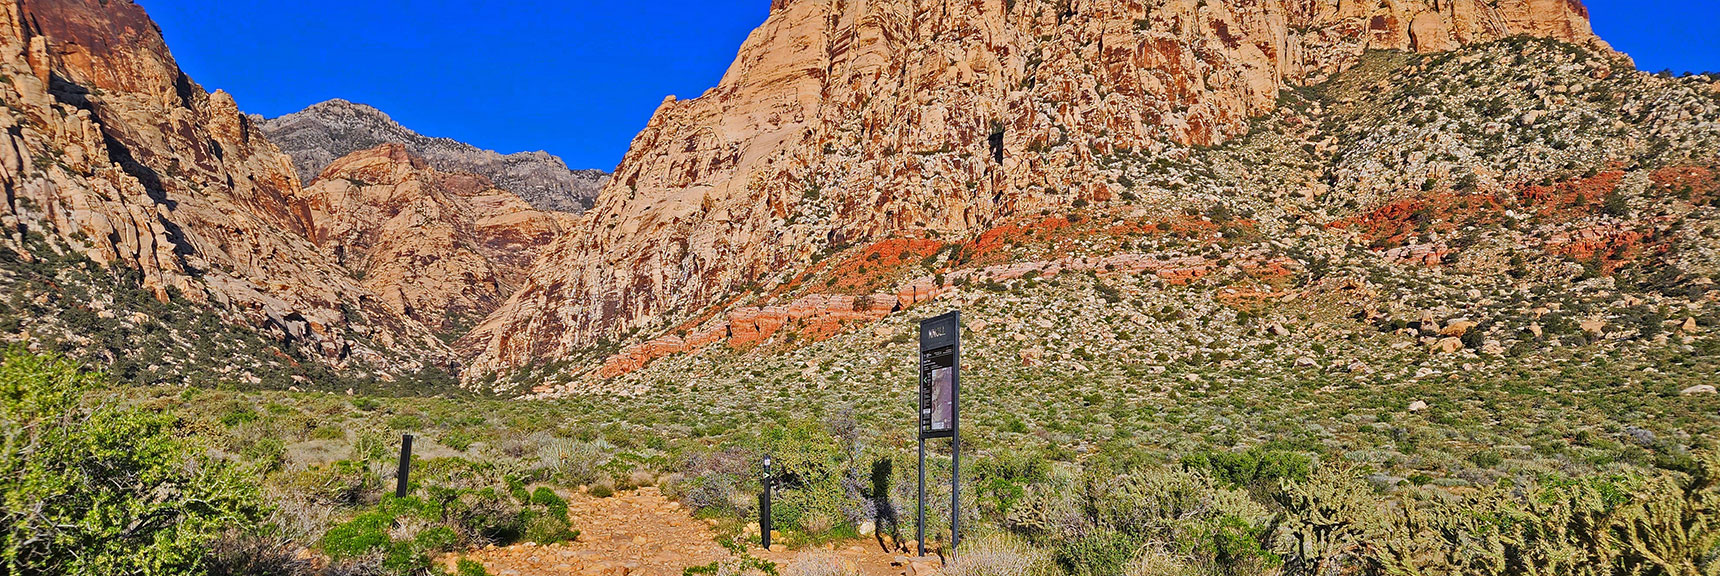 Arrival At The Knoll Southern Trailhead at Oak Creek Canyon Trail | Knoll Trail | Red Rock Canyon National Conservation Area, Nevada | David Smith | LasVegasAreaTrails.com